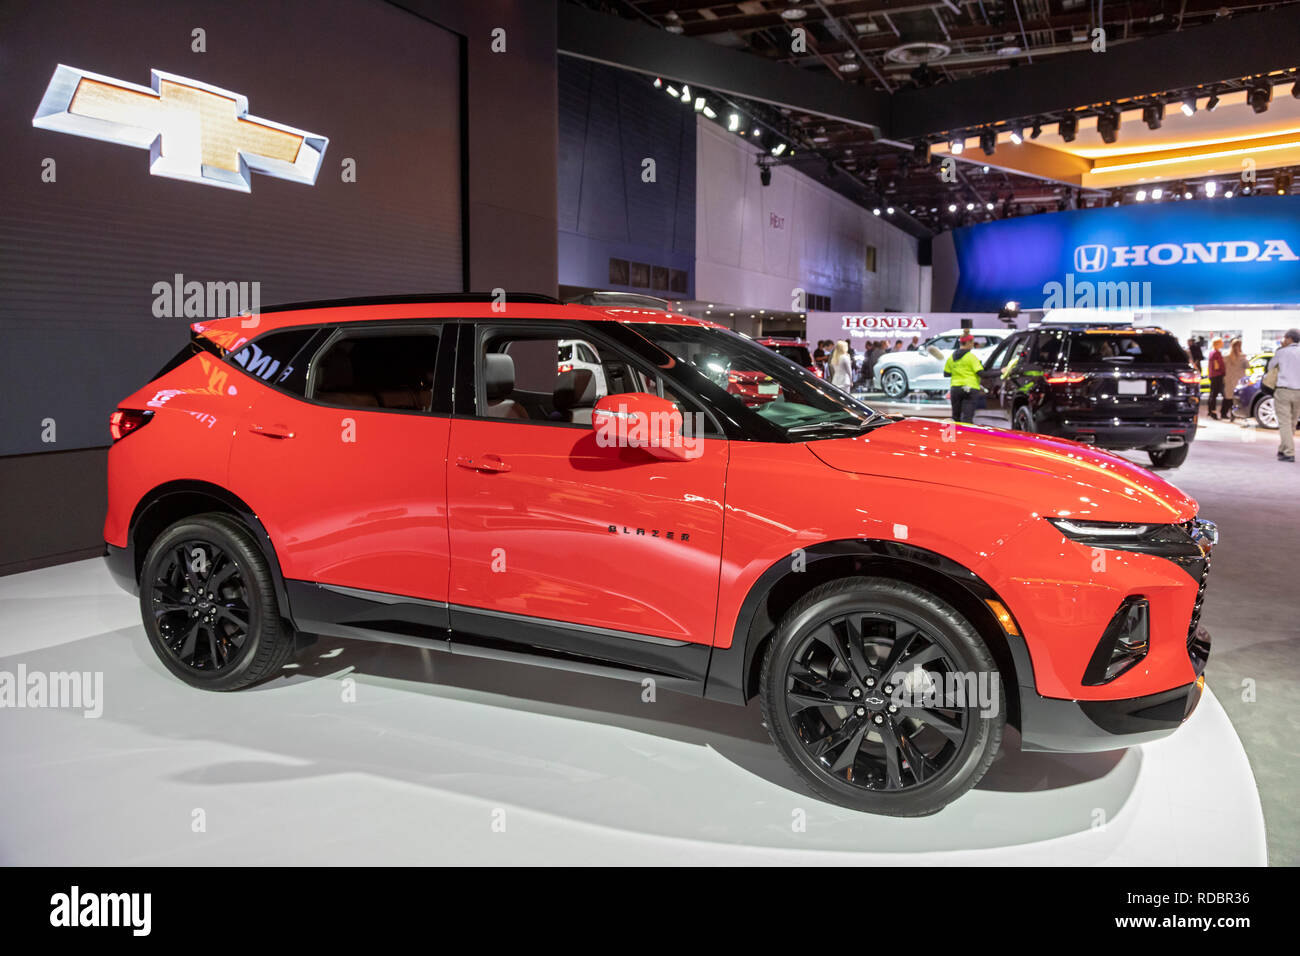 Detroit, Michigan - The Chevrolet Blazer, a mid-size crossover SUV on display at the North American International Auto Show. The Blazer is built in Ra Stock Photo